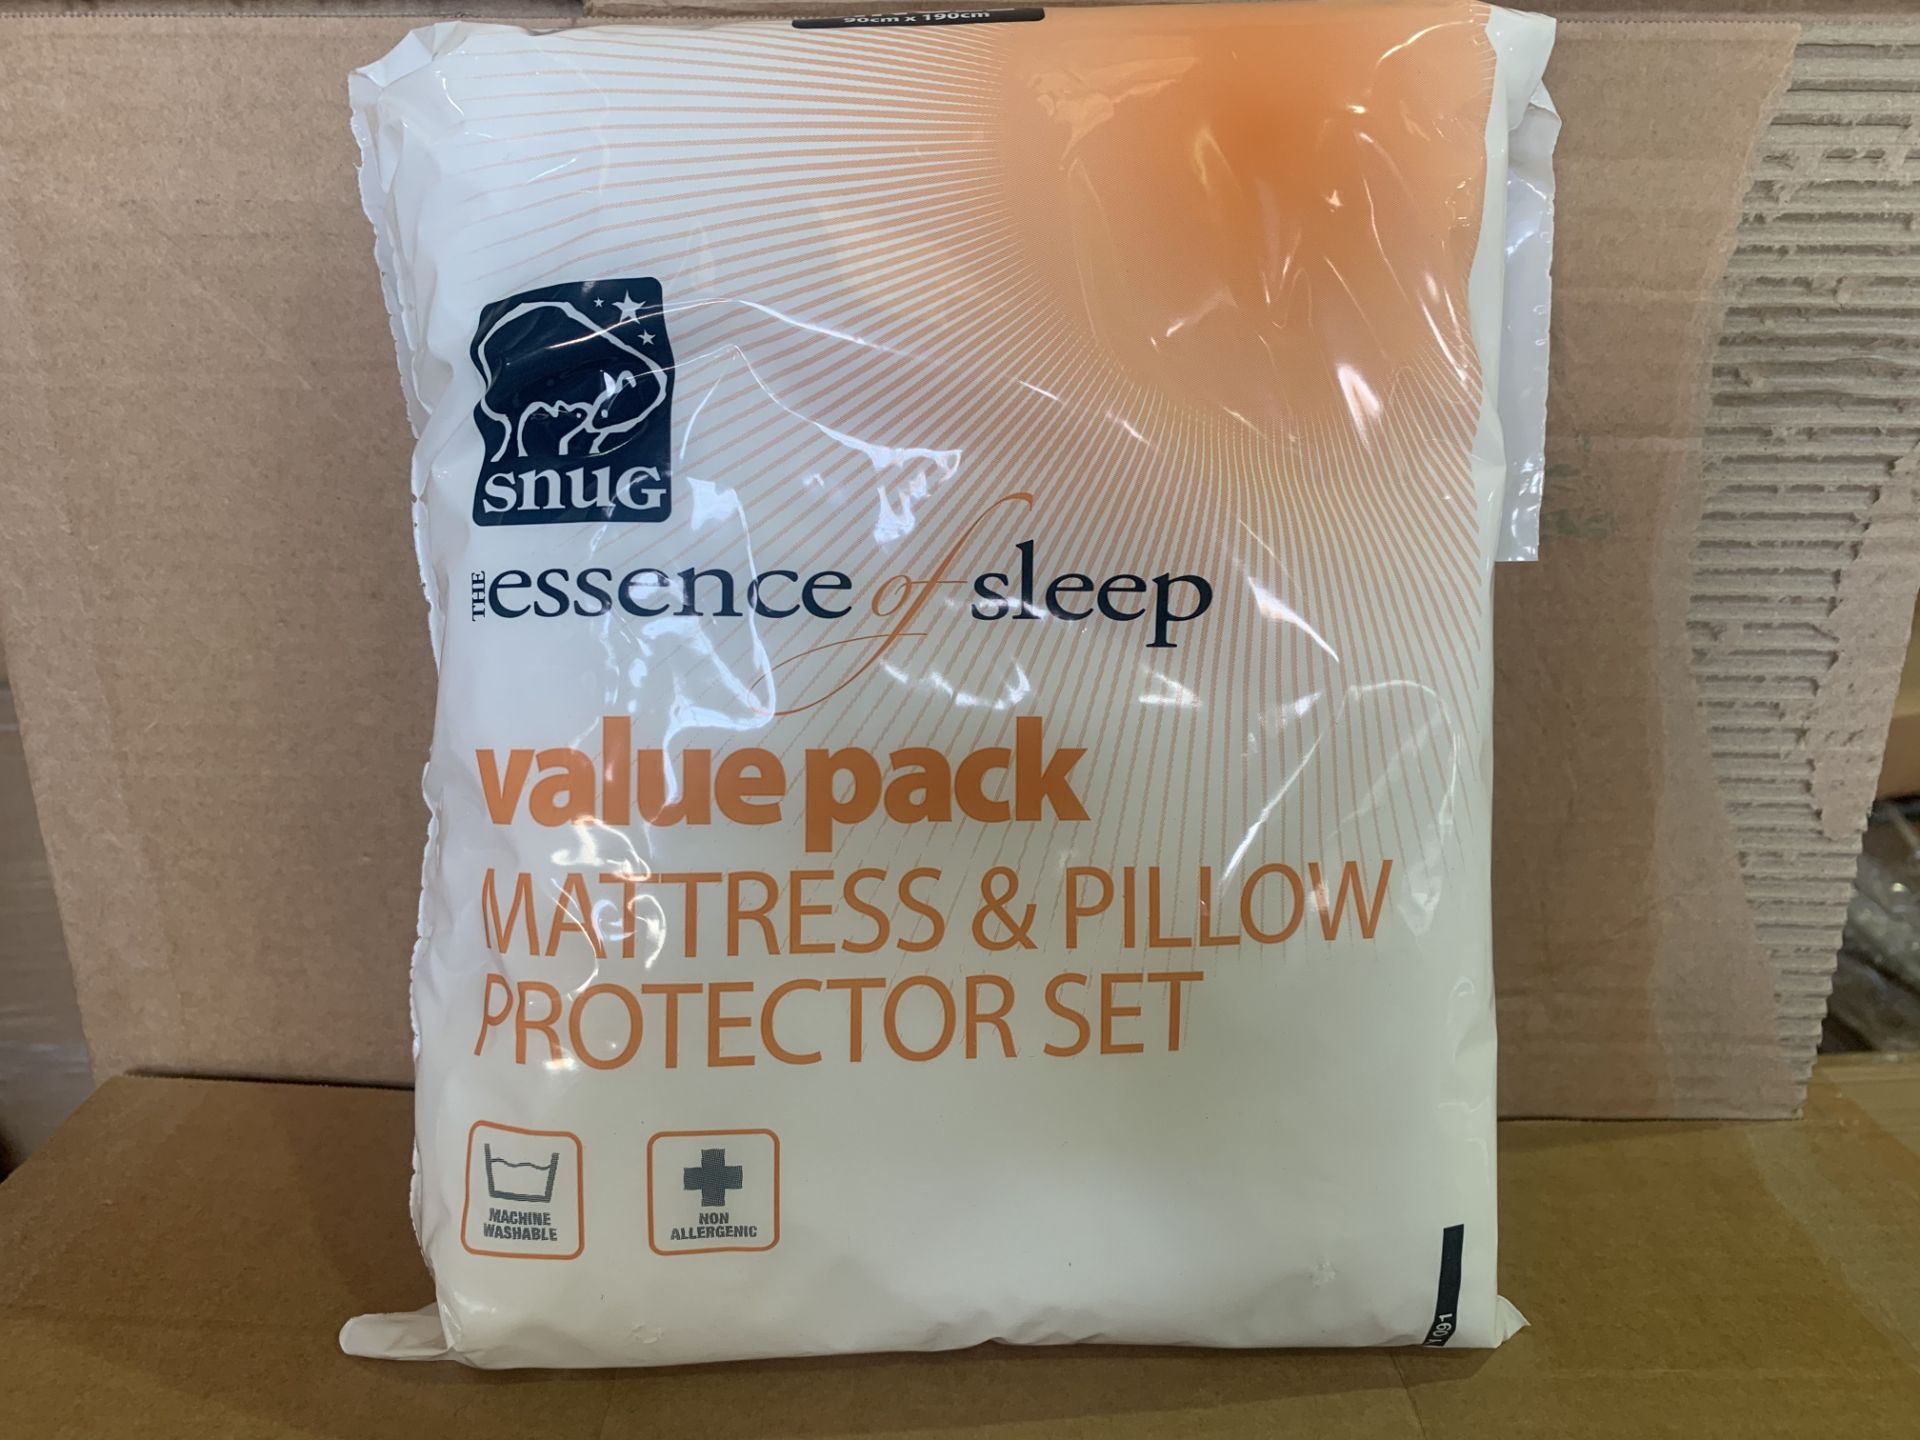 24 X BRAND NEW BOXED SNUG ESSENCE OF SLEEP MATTRESS AND PILLOW PROTECTOR SETS IN 3 BOXES SINGLE